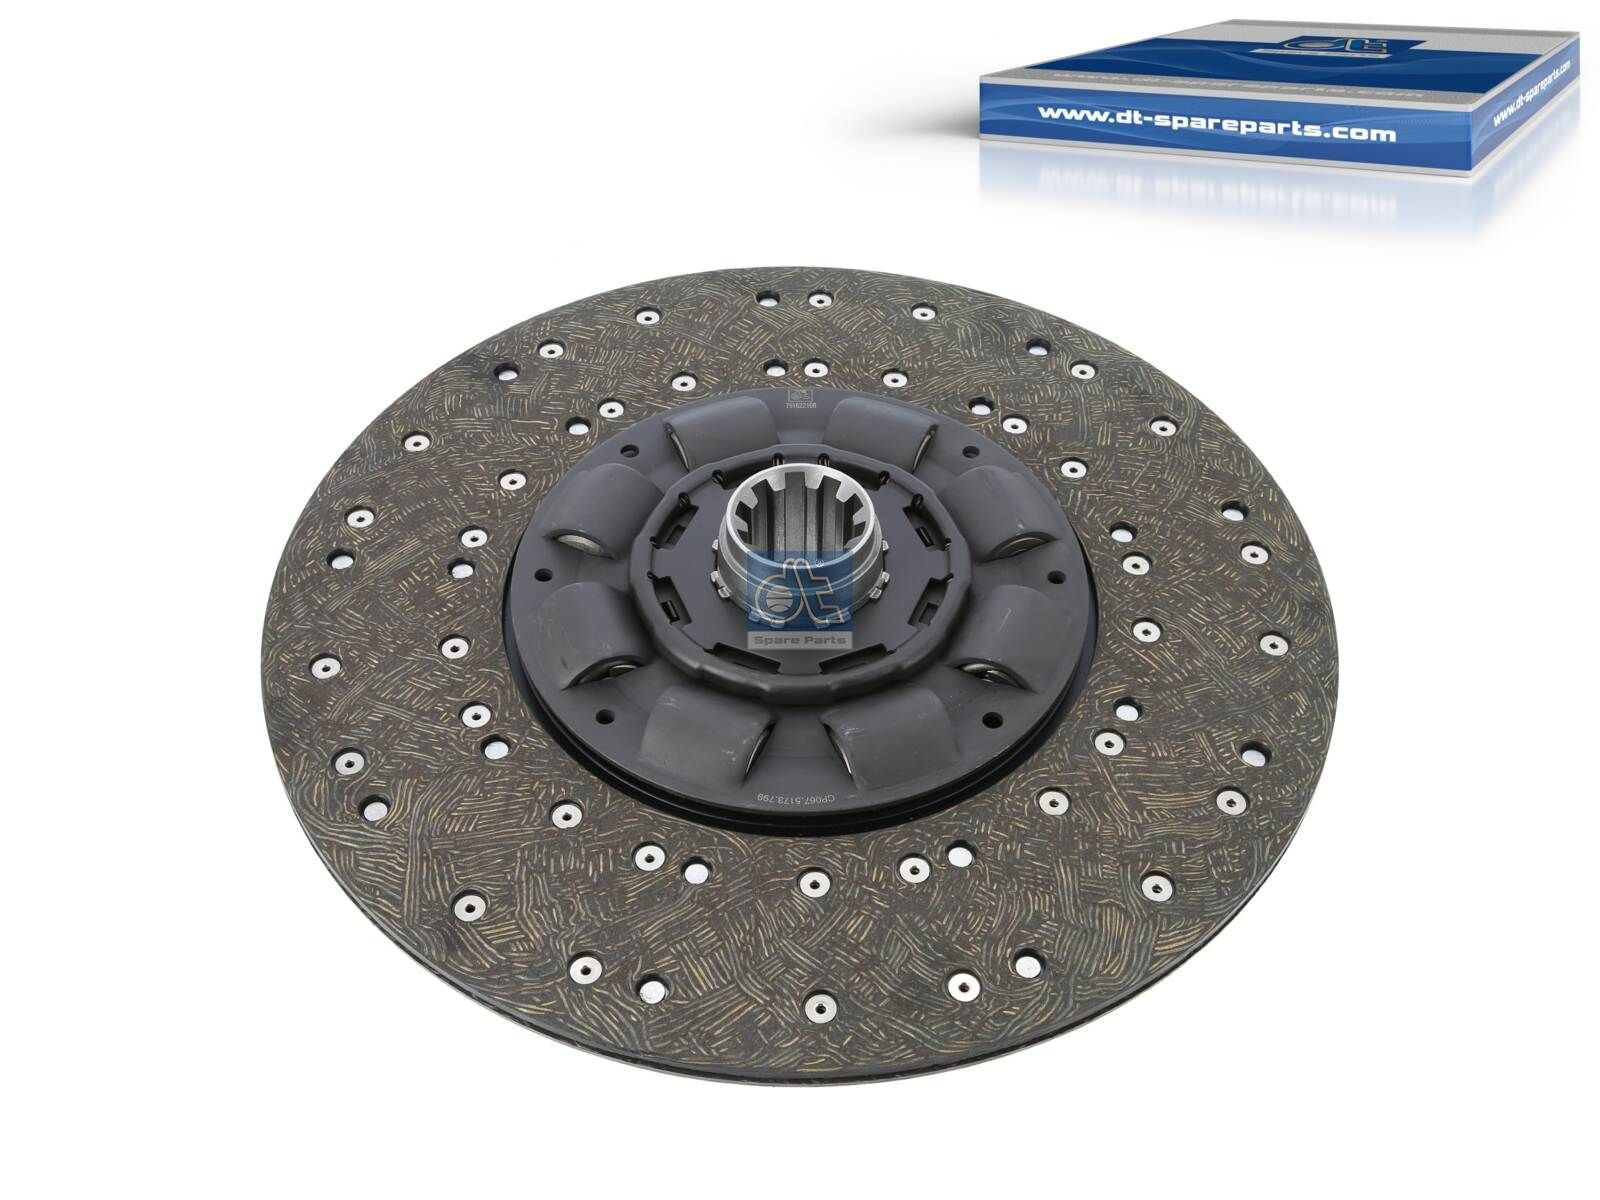 1878 002 729 DT Spare Parts 430mm Clutch Plate 4.62799 buy